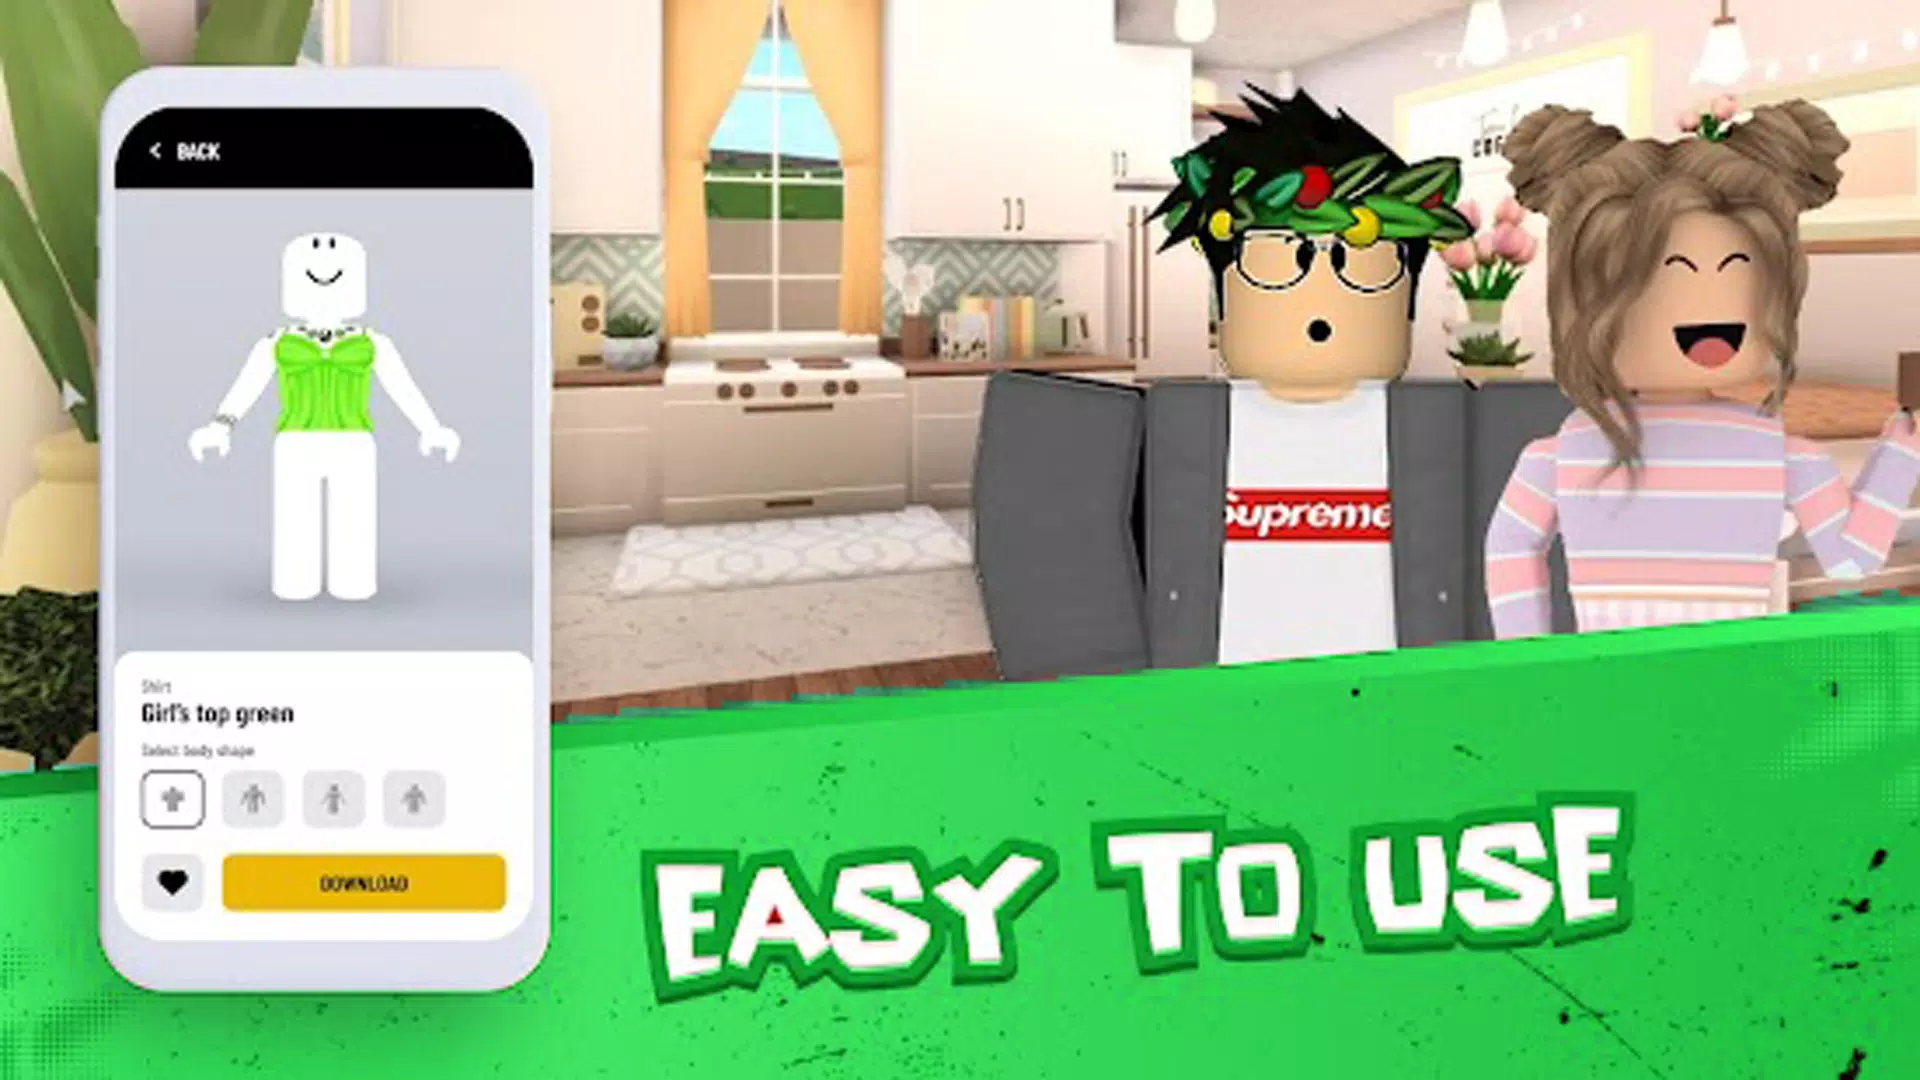 Download Shirts for roblox Free for Android - Shirts for roblox APK  Download 